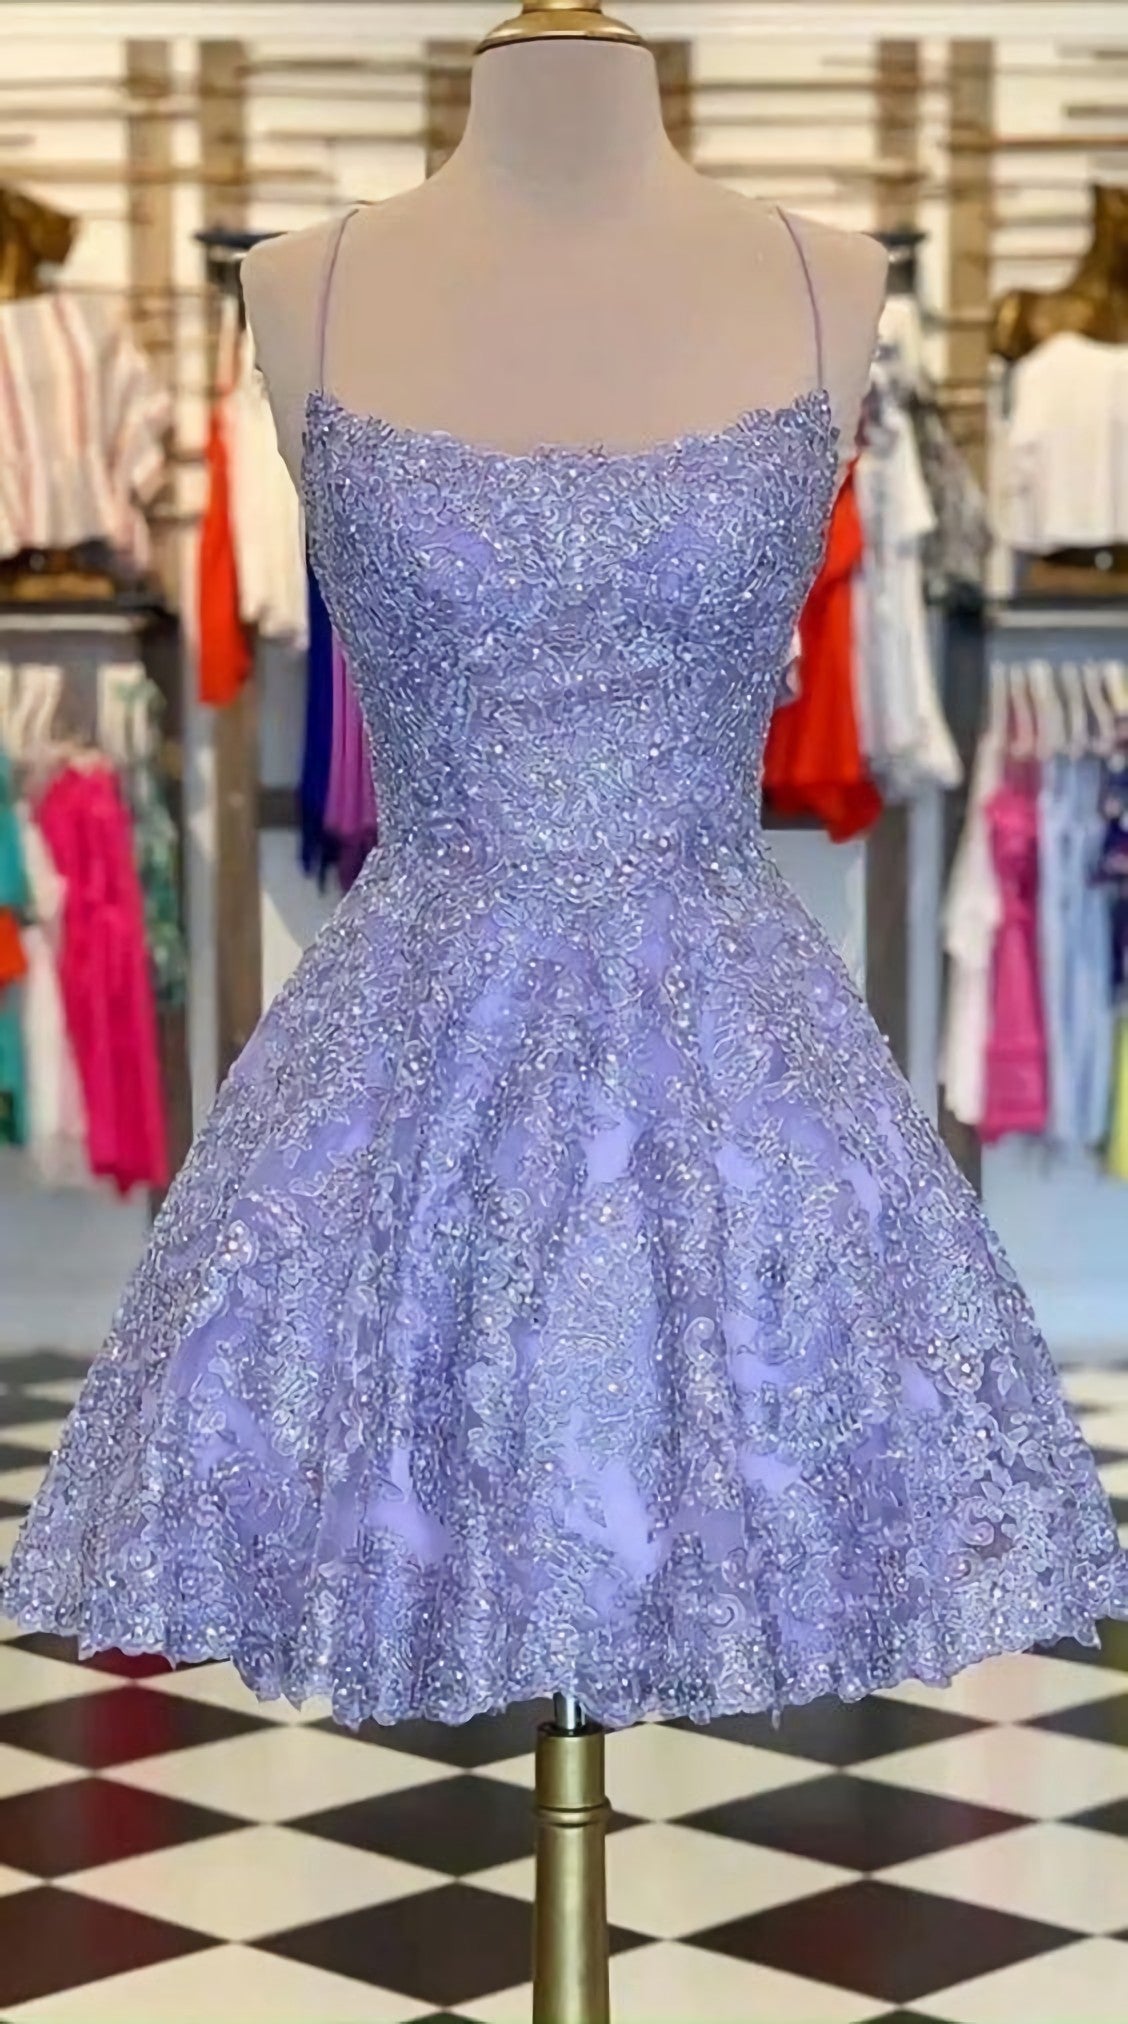 Bridesmaids Dresses Strapless, Short Homecoming Dresses, Formal Lace Dresses, For Teens